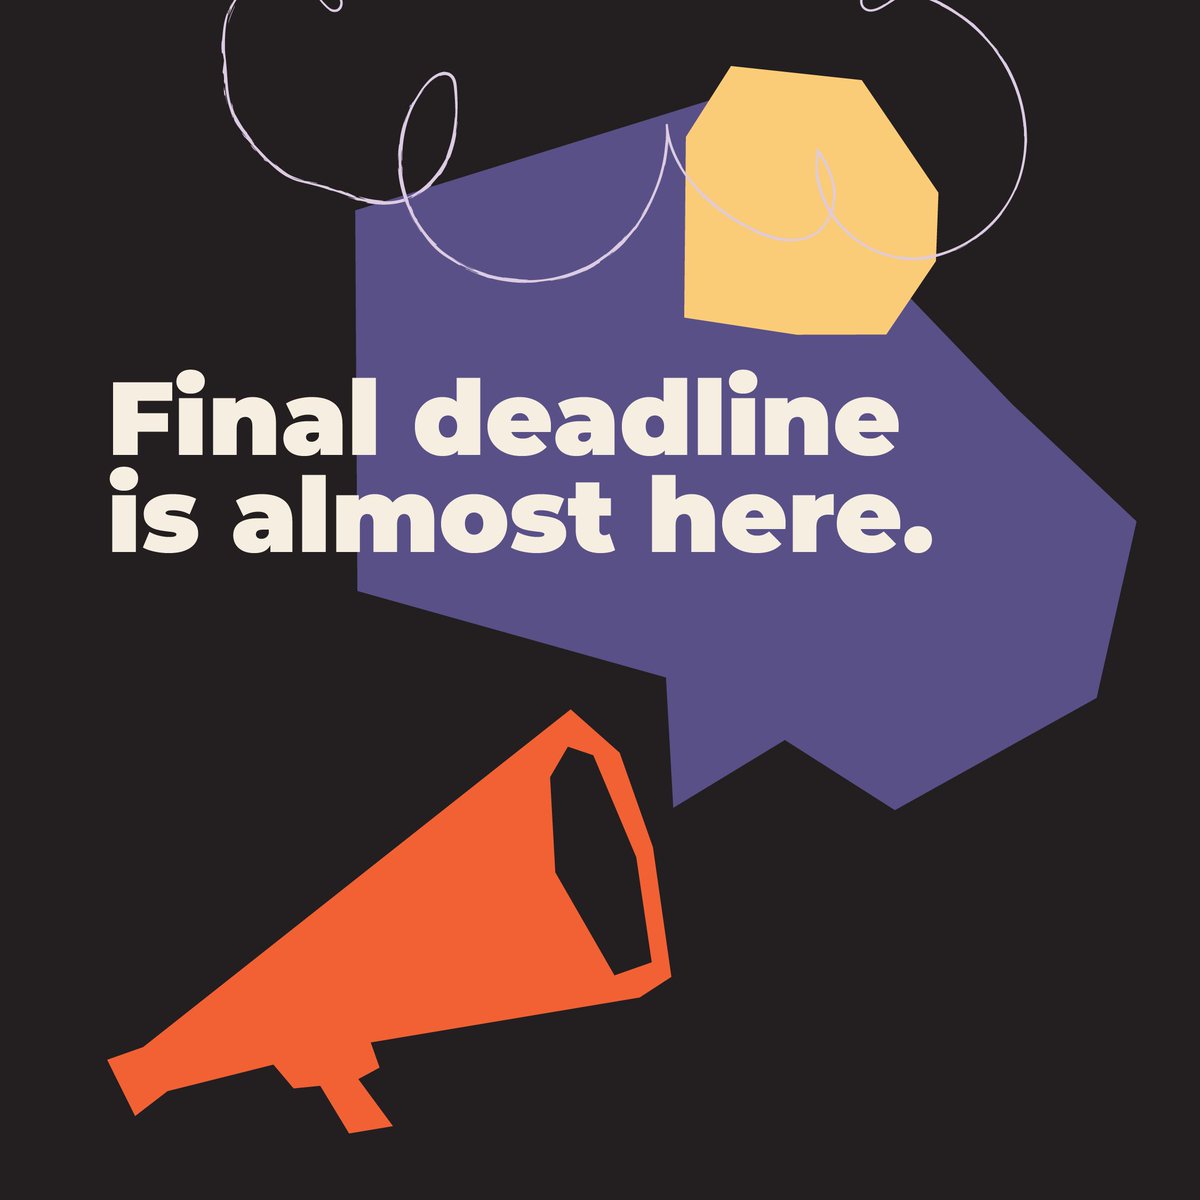 Procrastinators unite! There’s still time to submit your work for the 2024 IABC Capital Awards. This is your last chance to enter. The final extended deadline is midnight on April 16. Enter now at capitalawards.ca! #YEG #YEGAwards #IABC